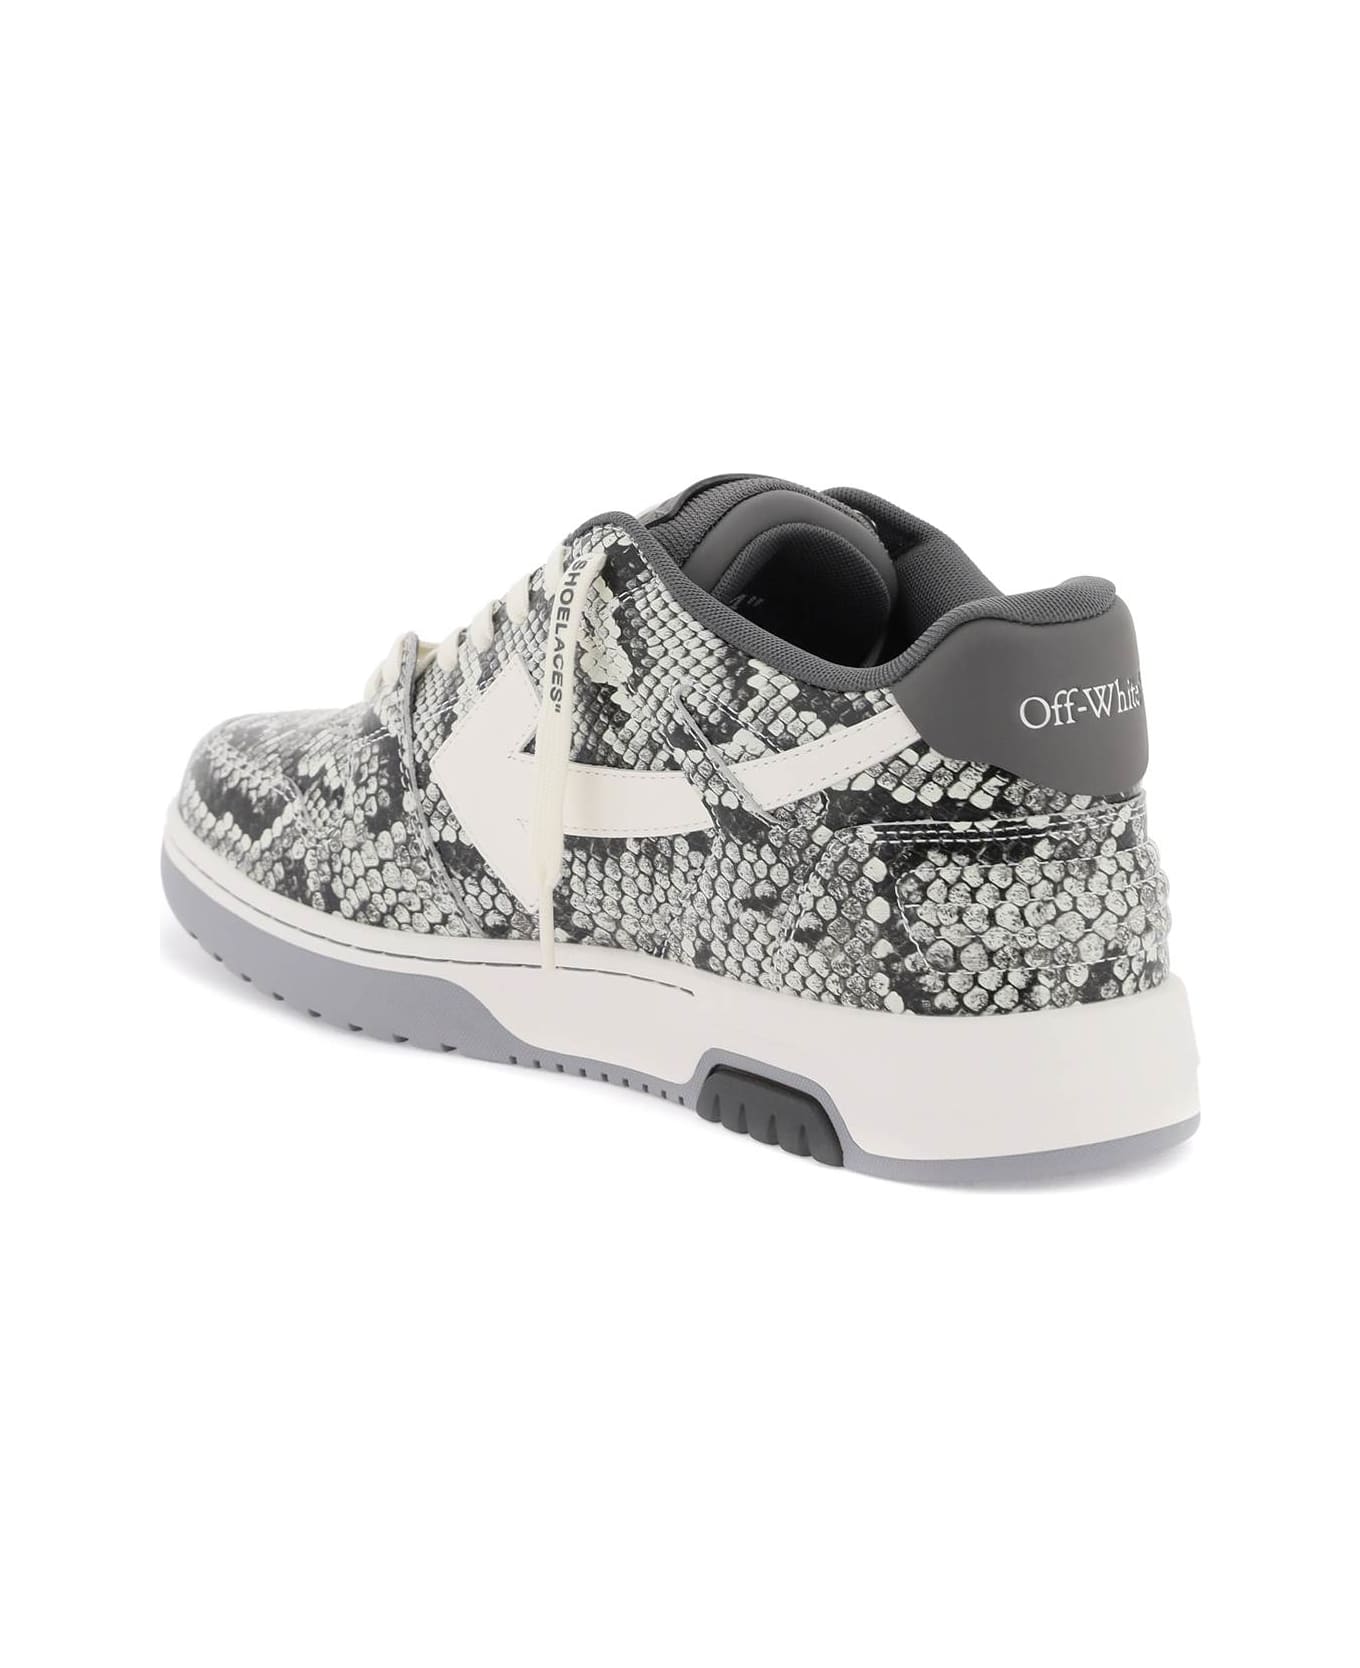 Off-White Out Of Office Sneakers - DARK GREY (White)